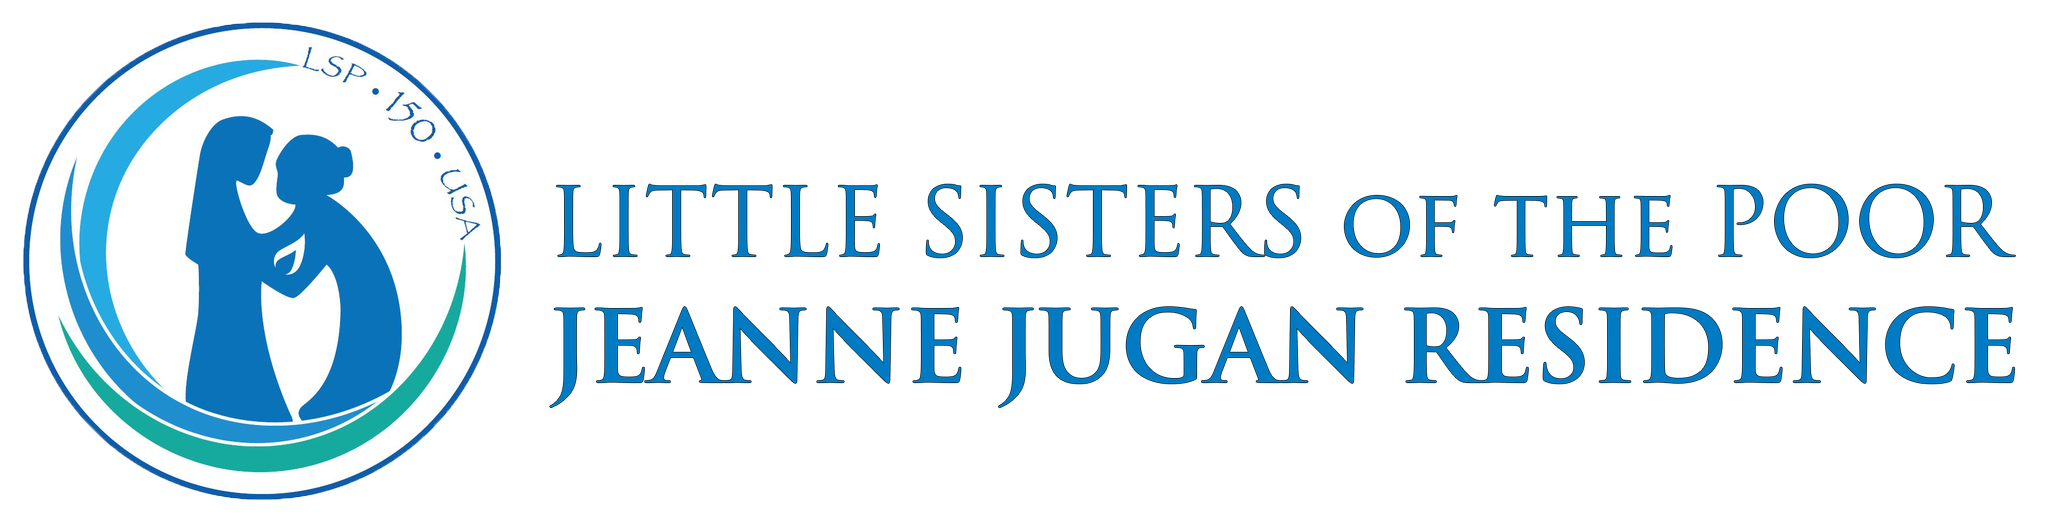 Little Sisters of the Poor Delaware